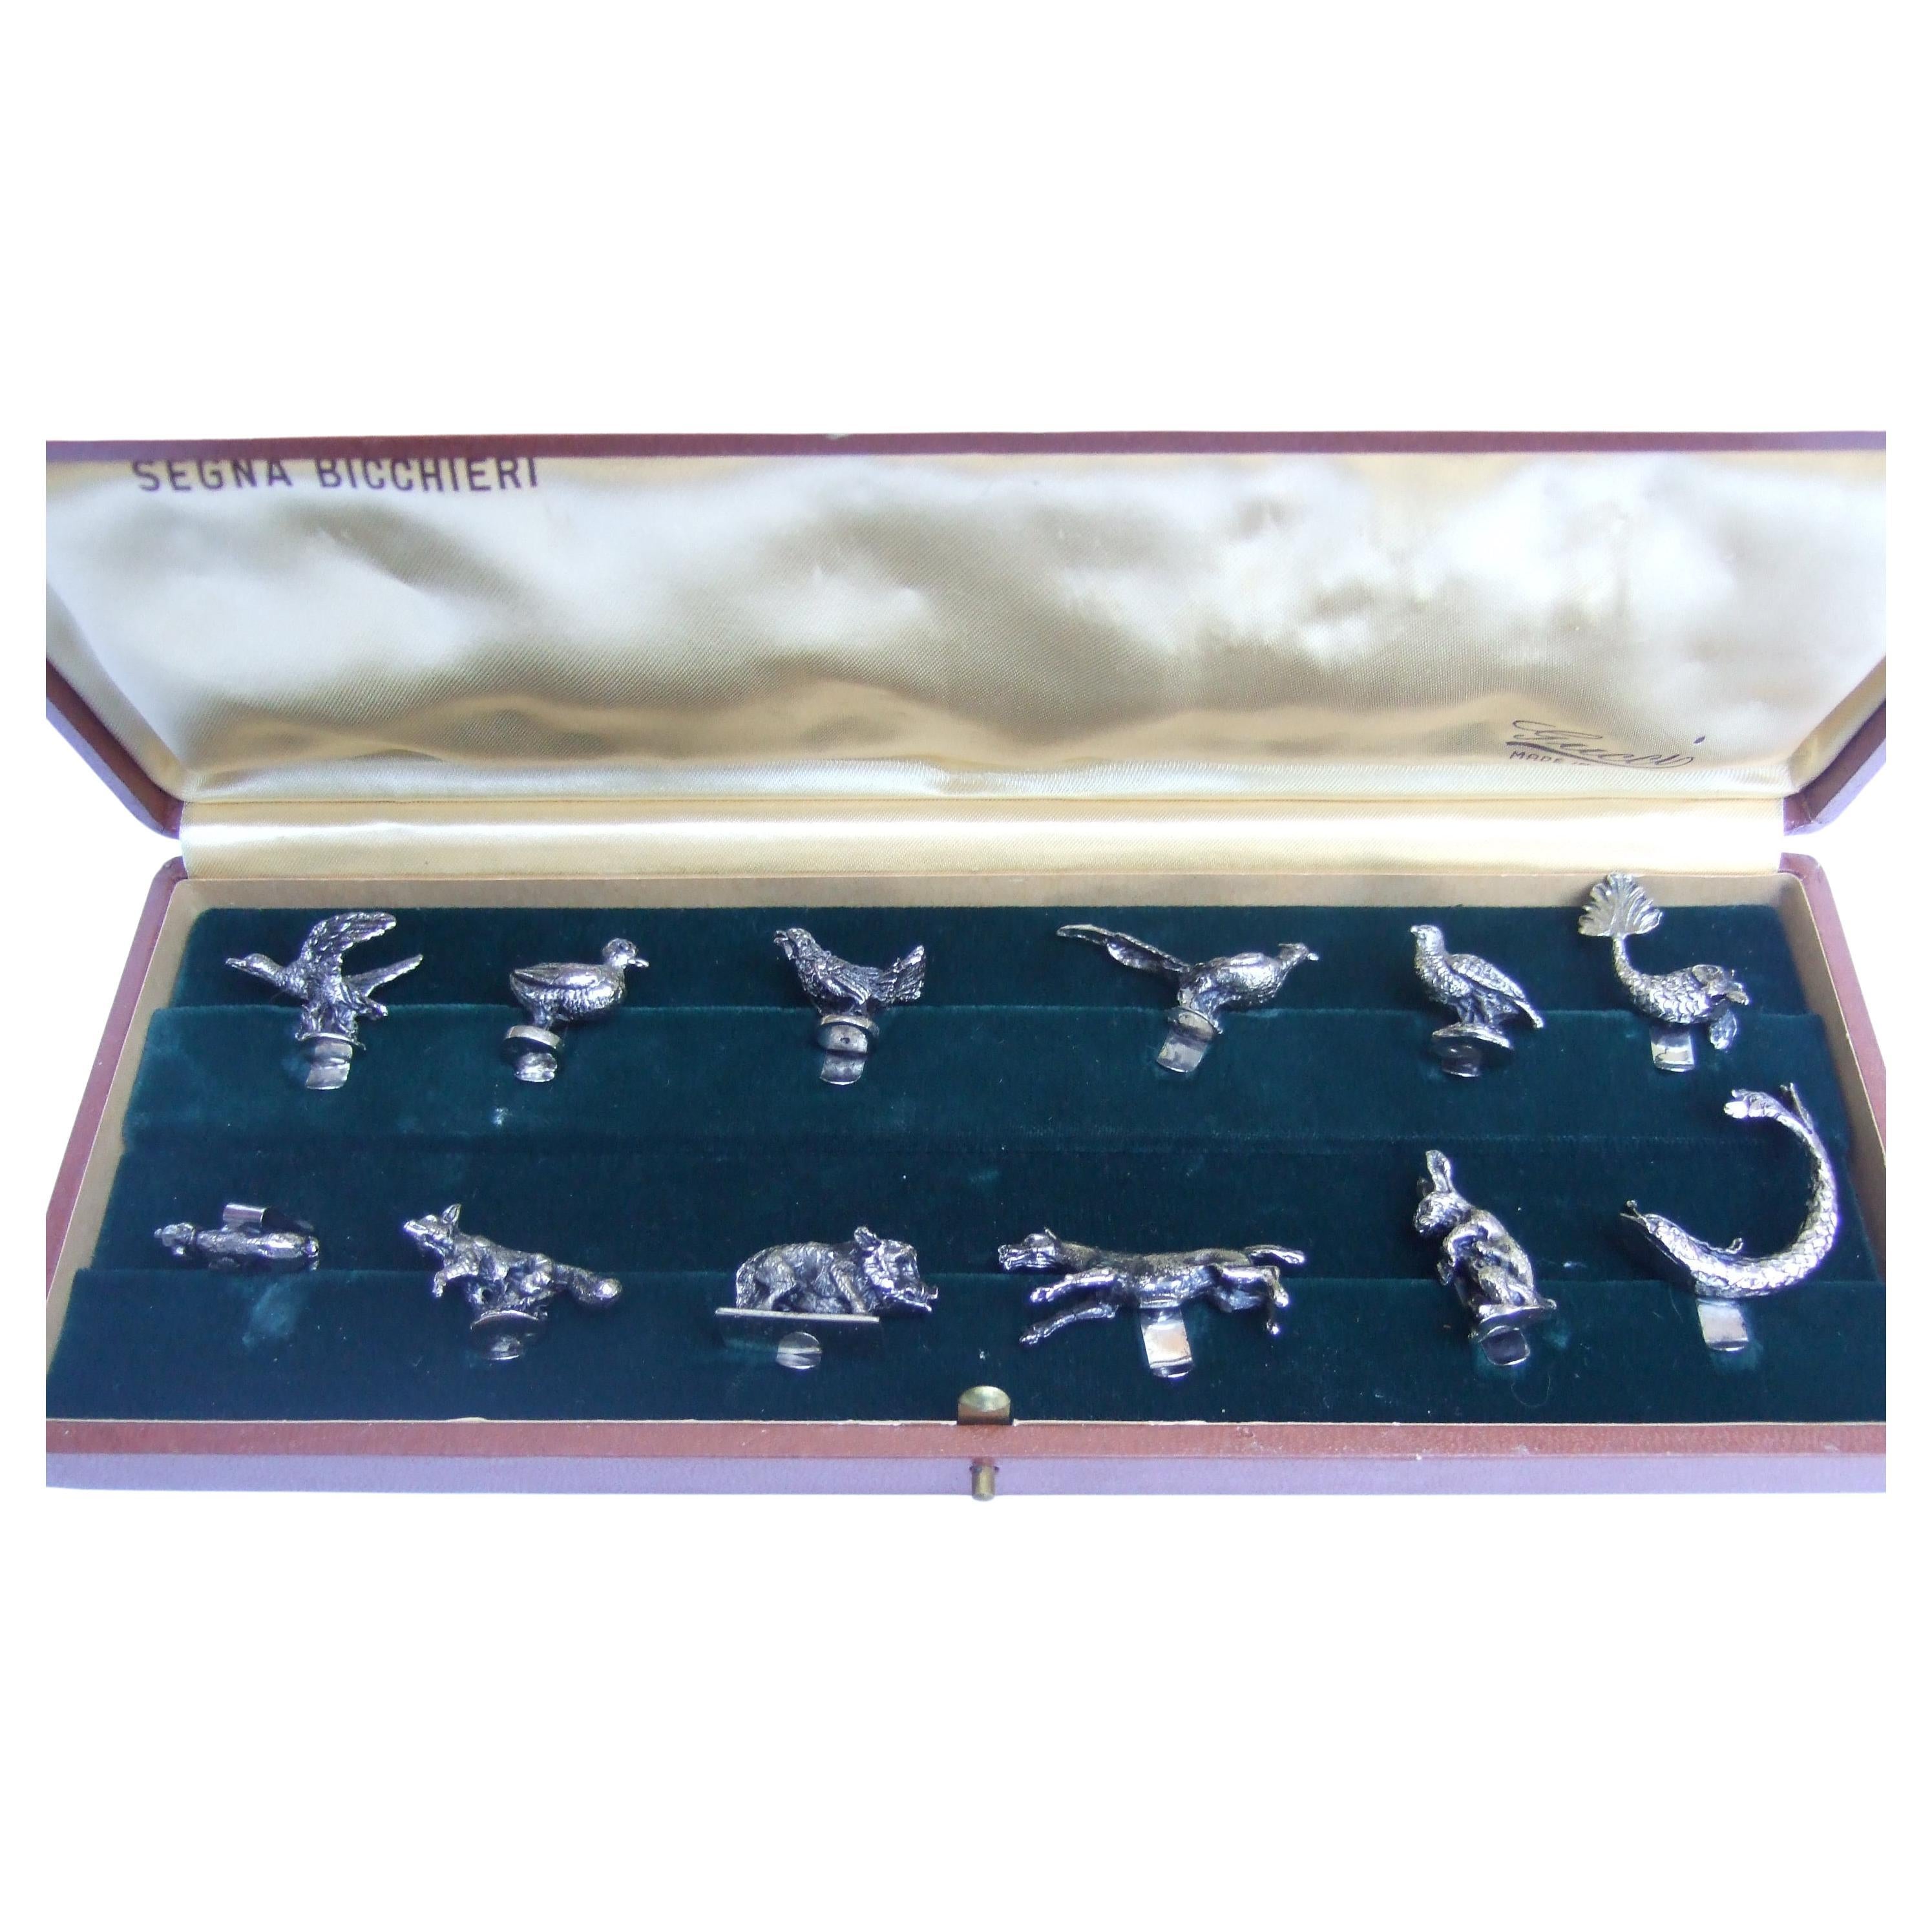 Gucci Italy Elegant Silver Animal Menagerie of Place Card Holders in Gucci Box  13